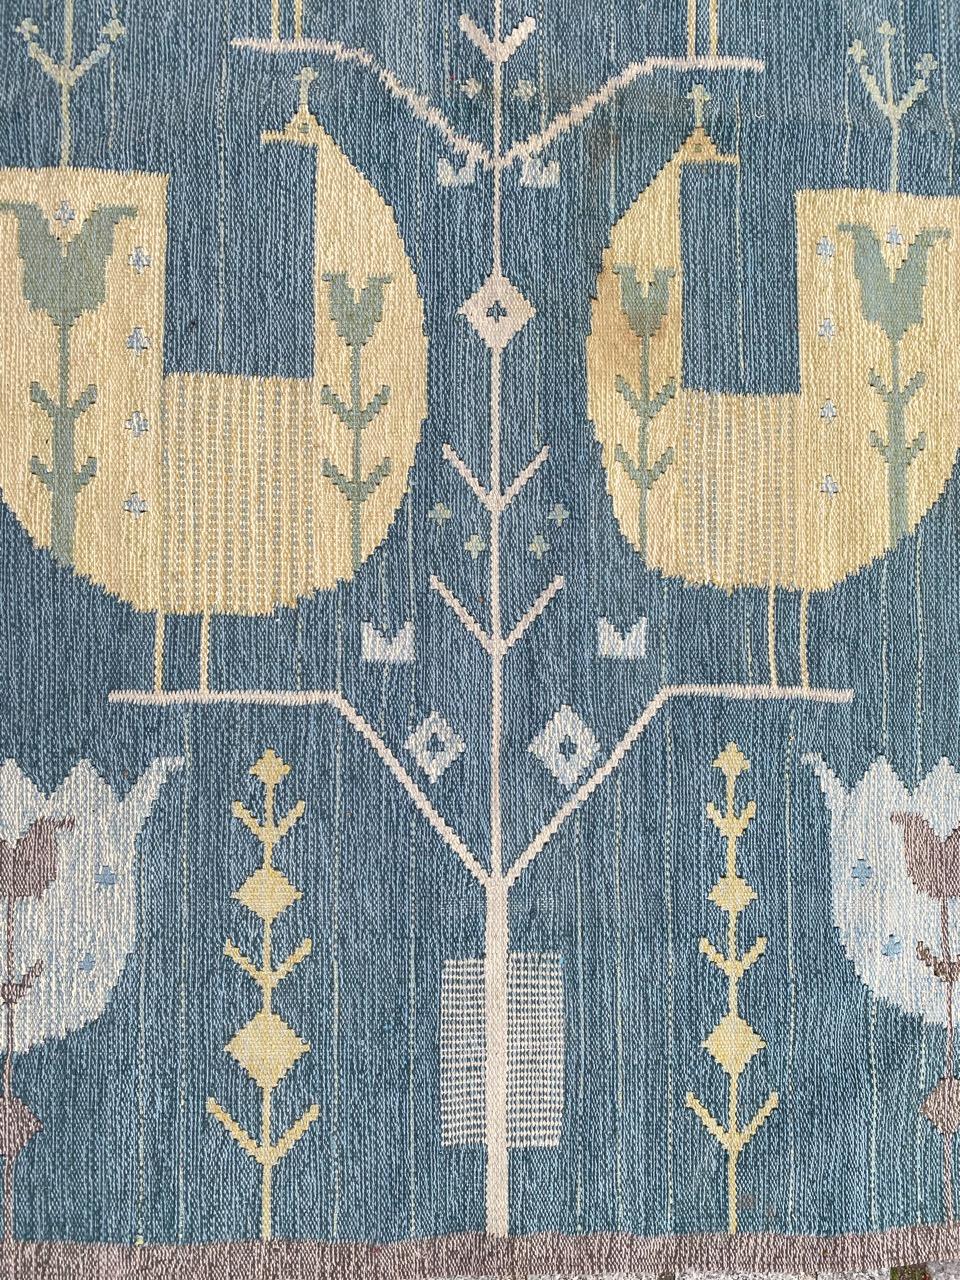 This woven woollen tapestry features a design of stylised birds and flowers. It is woven in a heavyweight wool using mainly nature-inspired shades of sky blue, yellow and ecru highlighting the flowers and birds. It has the designer's initials NE in